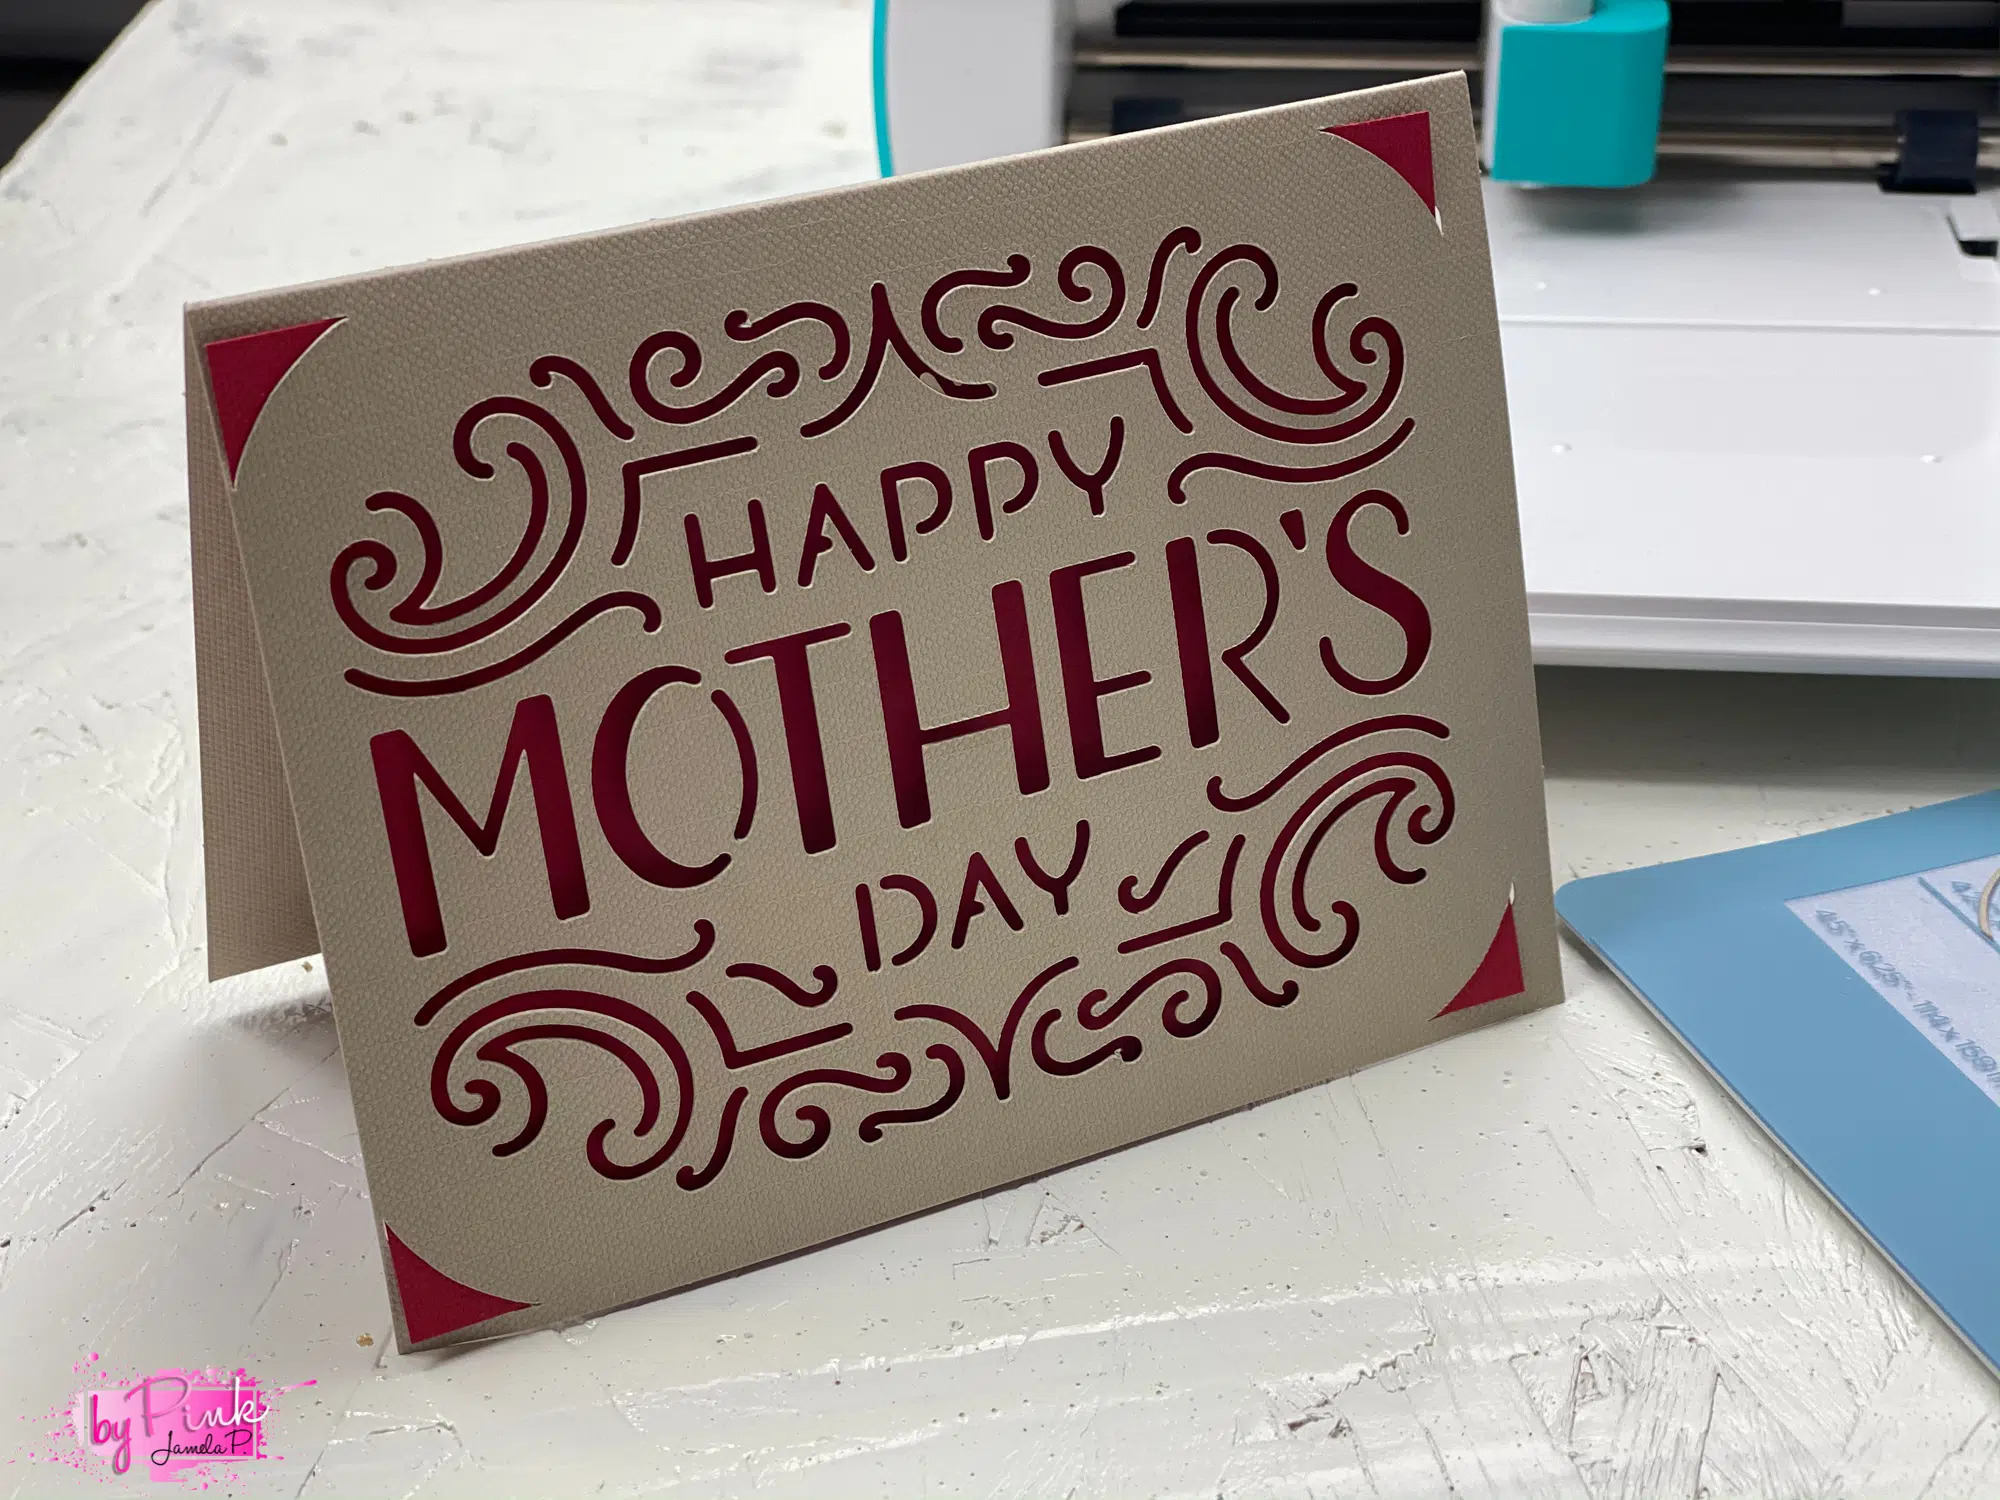 Download Here Are The Top Gifts Moms Want For Mother S Day This Year Drgnews